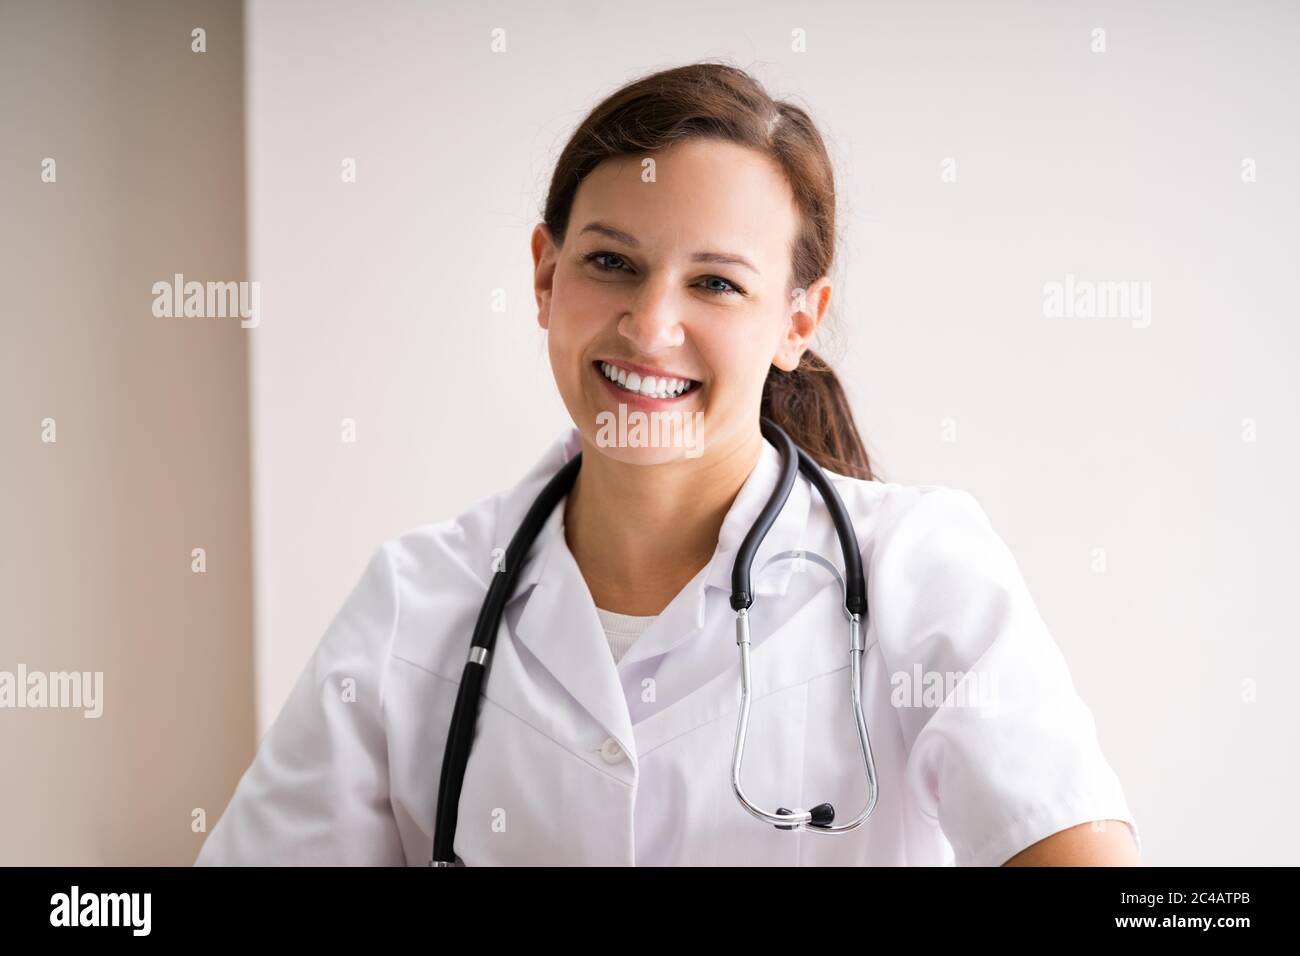 Medical Doctor With Stethoscope. Working Female Physician Stock Photo